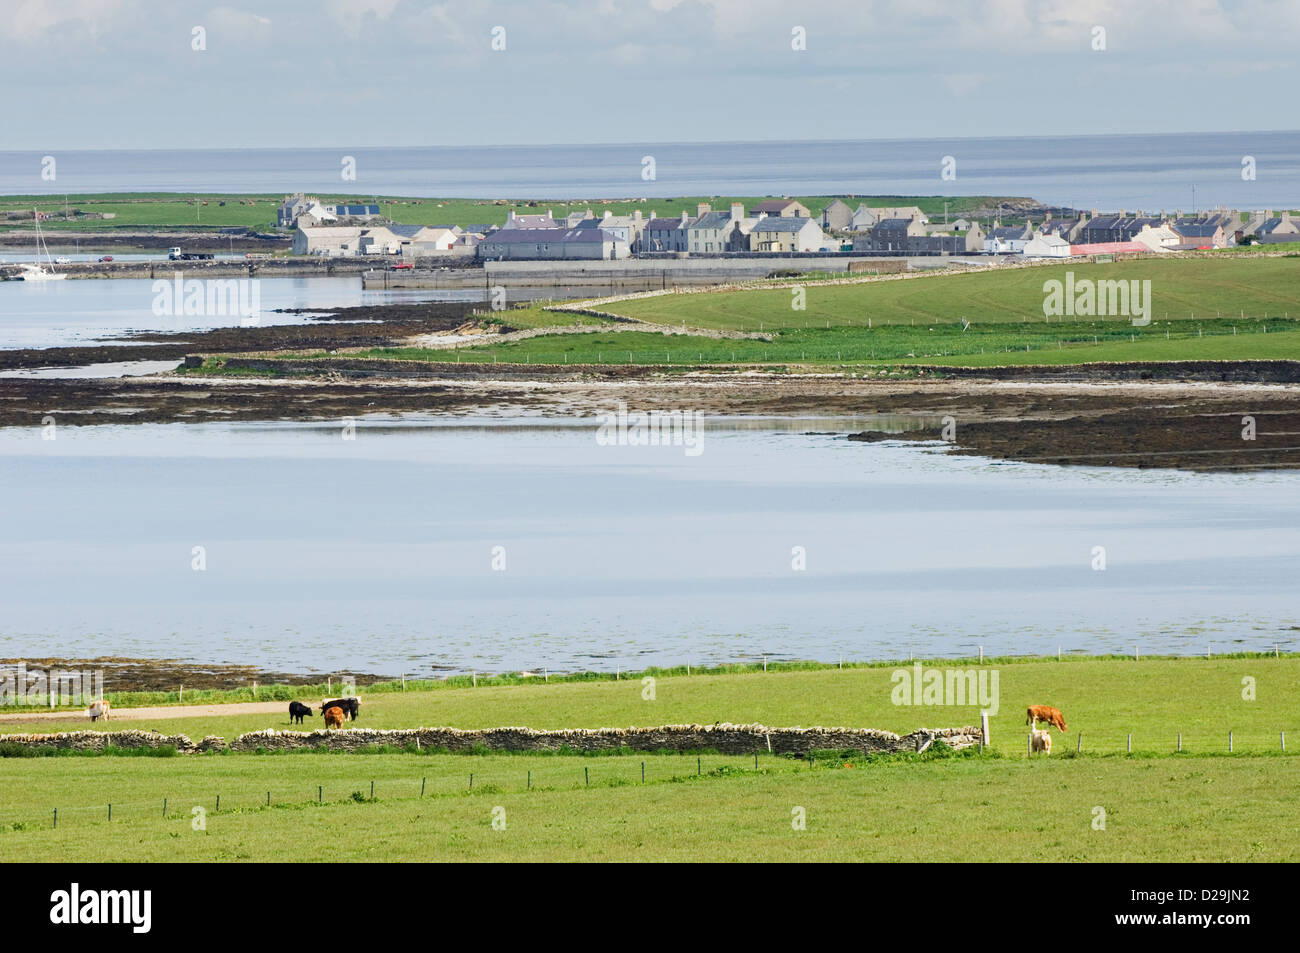 The village of Whitehall on the island of Stronsay, Orkney Islands, Scotland. Stock Photo